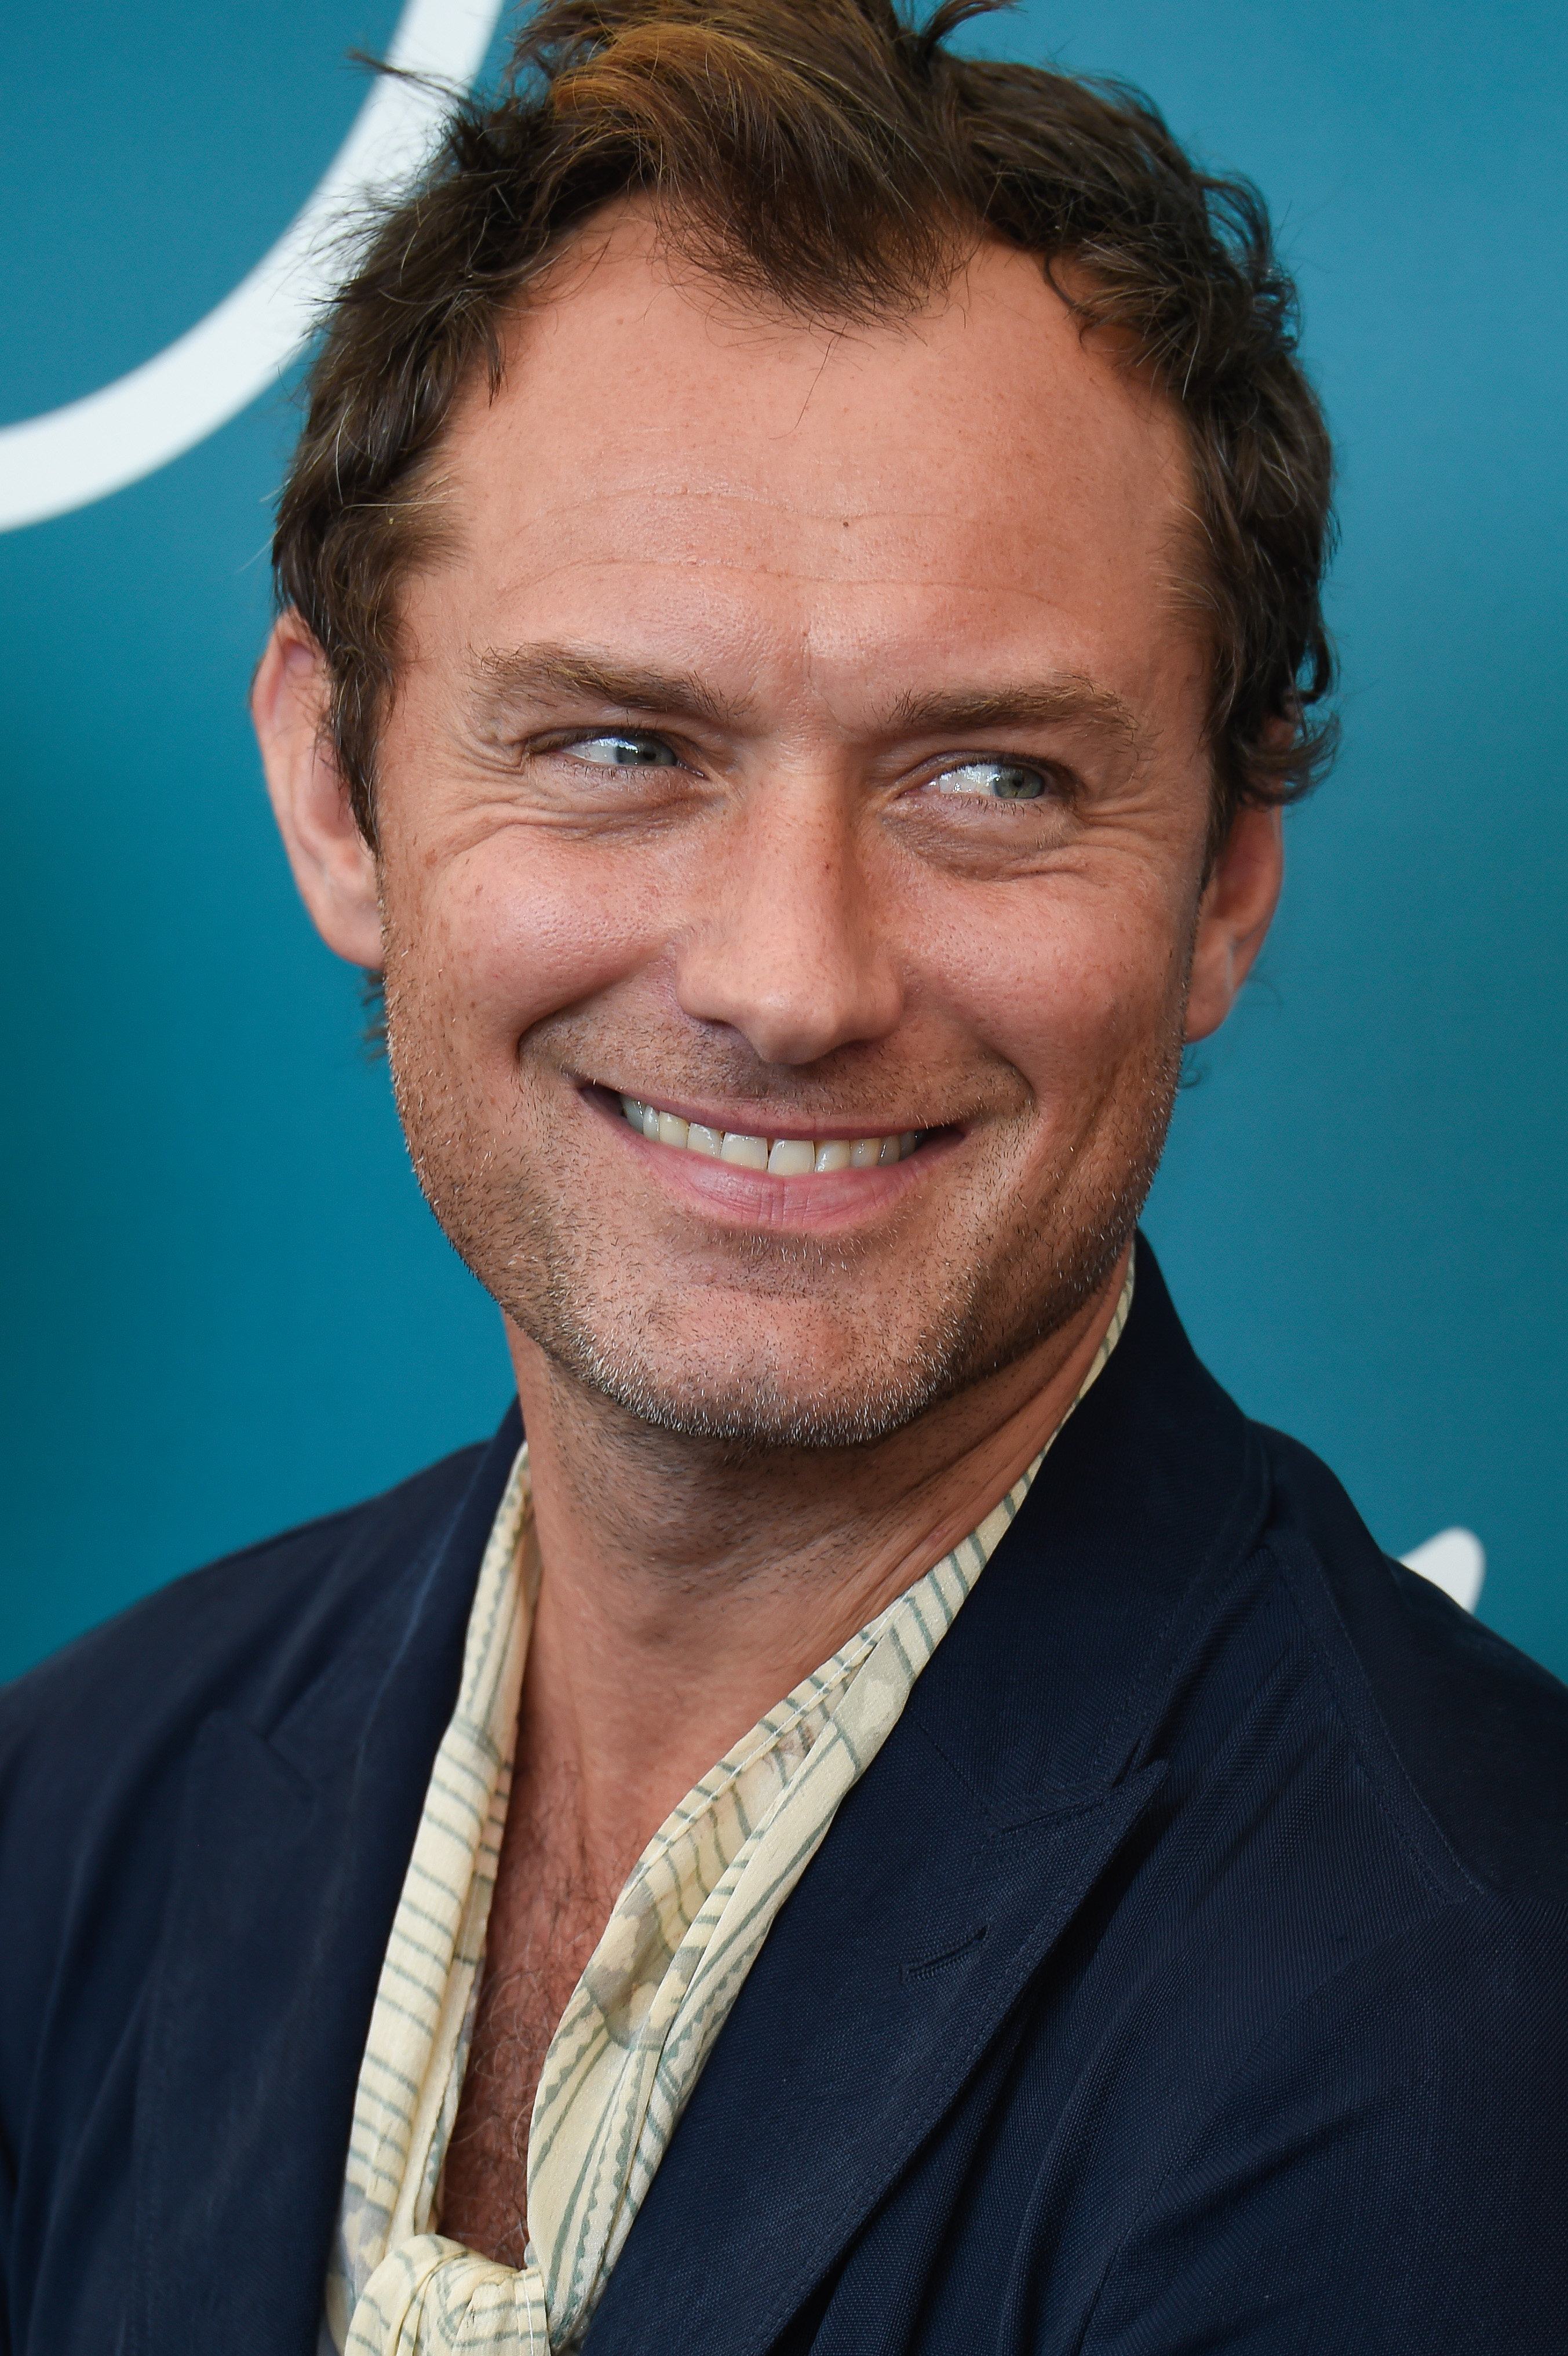 Jude Law at the 76 Venice International Film Festival in 2019 | Source: Getty Images